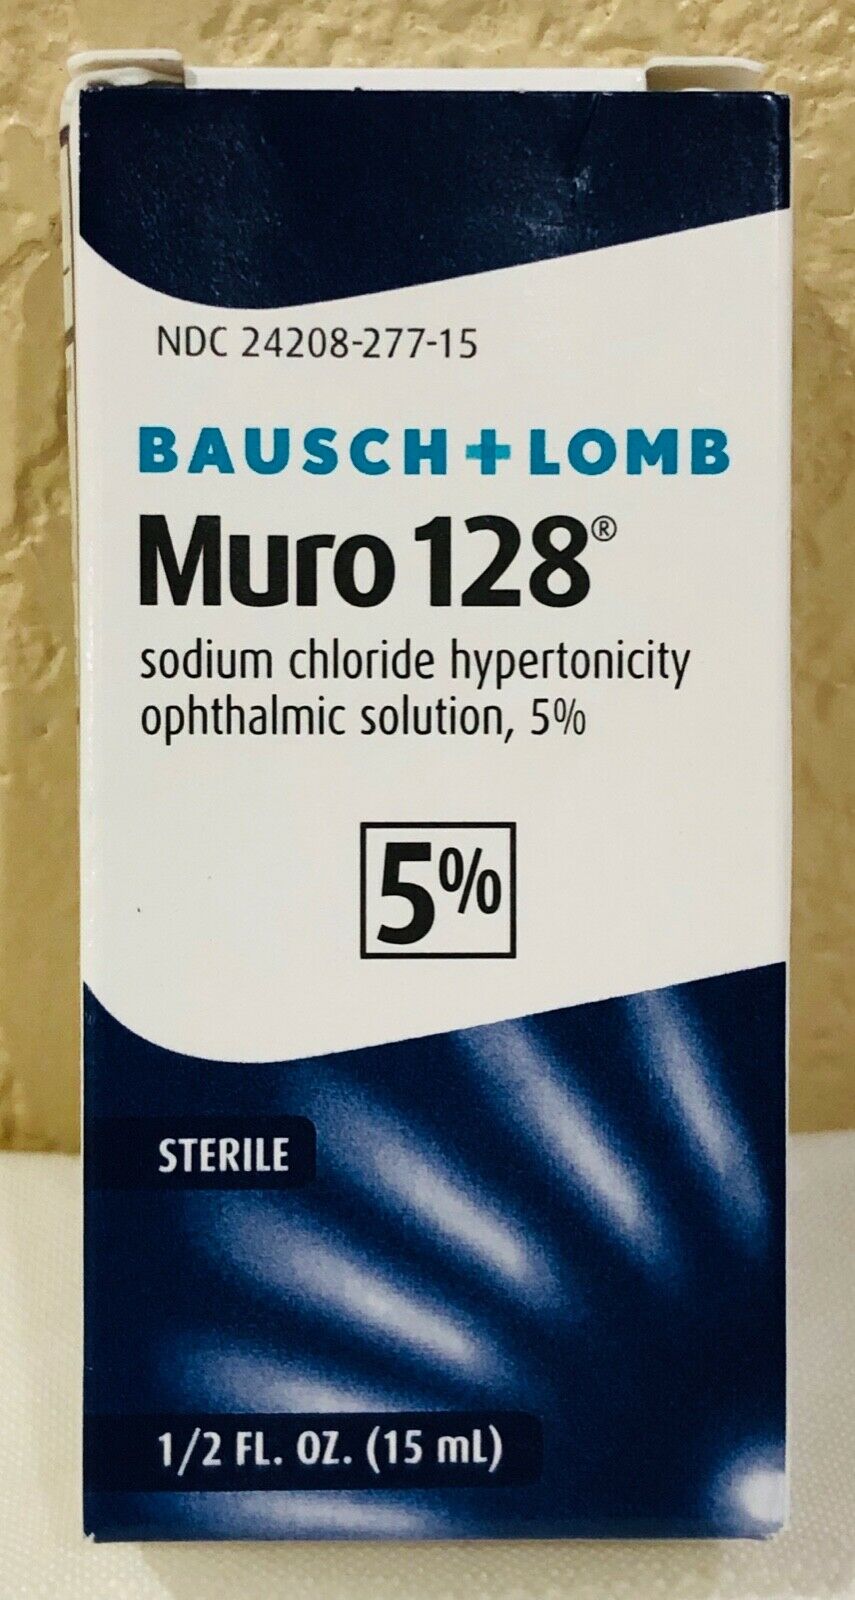 Bausch + Lomb MURO 128 Ophthalmic Solution 5% - 0.5oz (15ml) NEW>FREE SHIPPING!